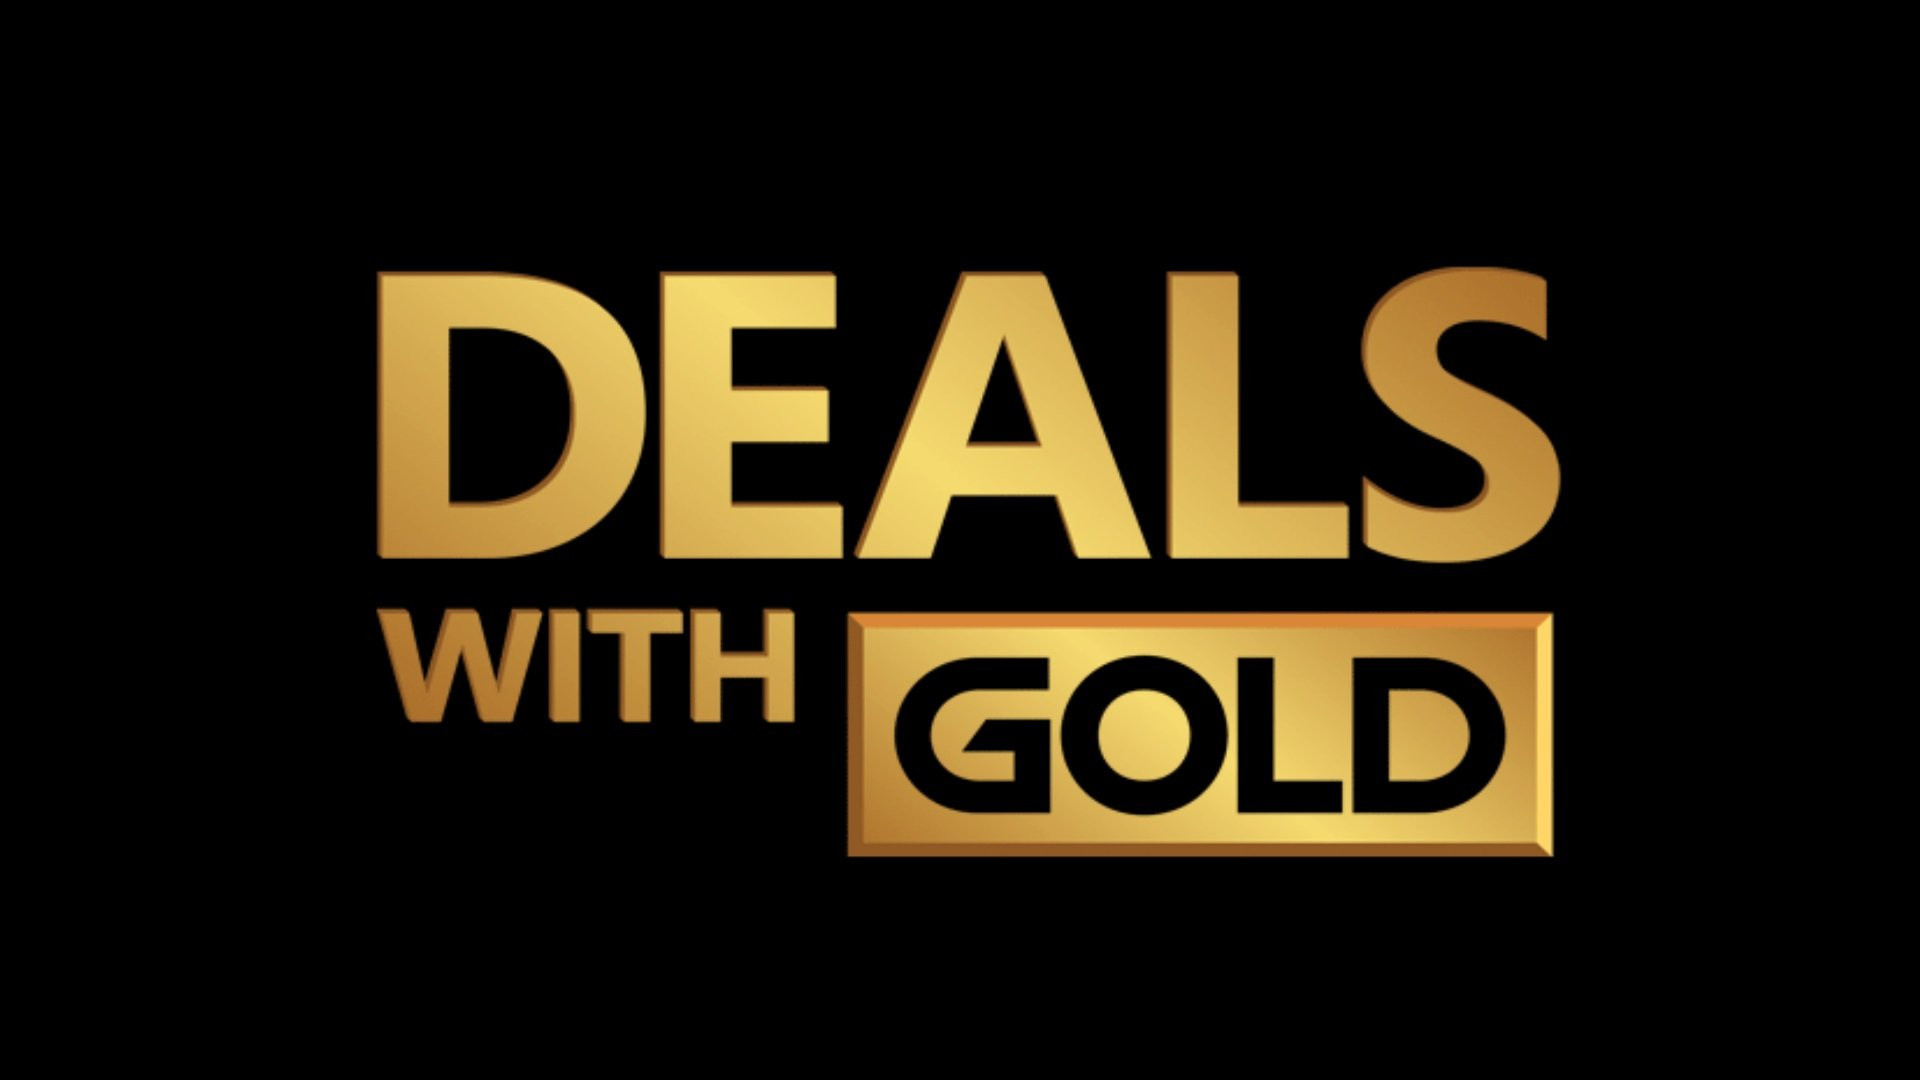 Deals with Gold semaine 5